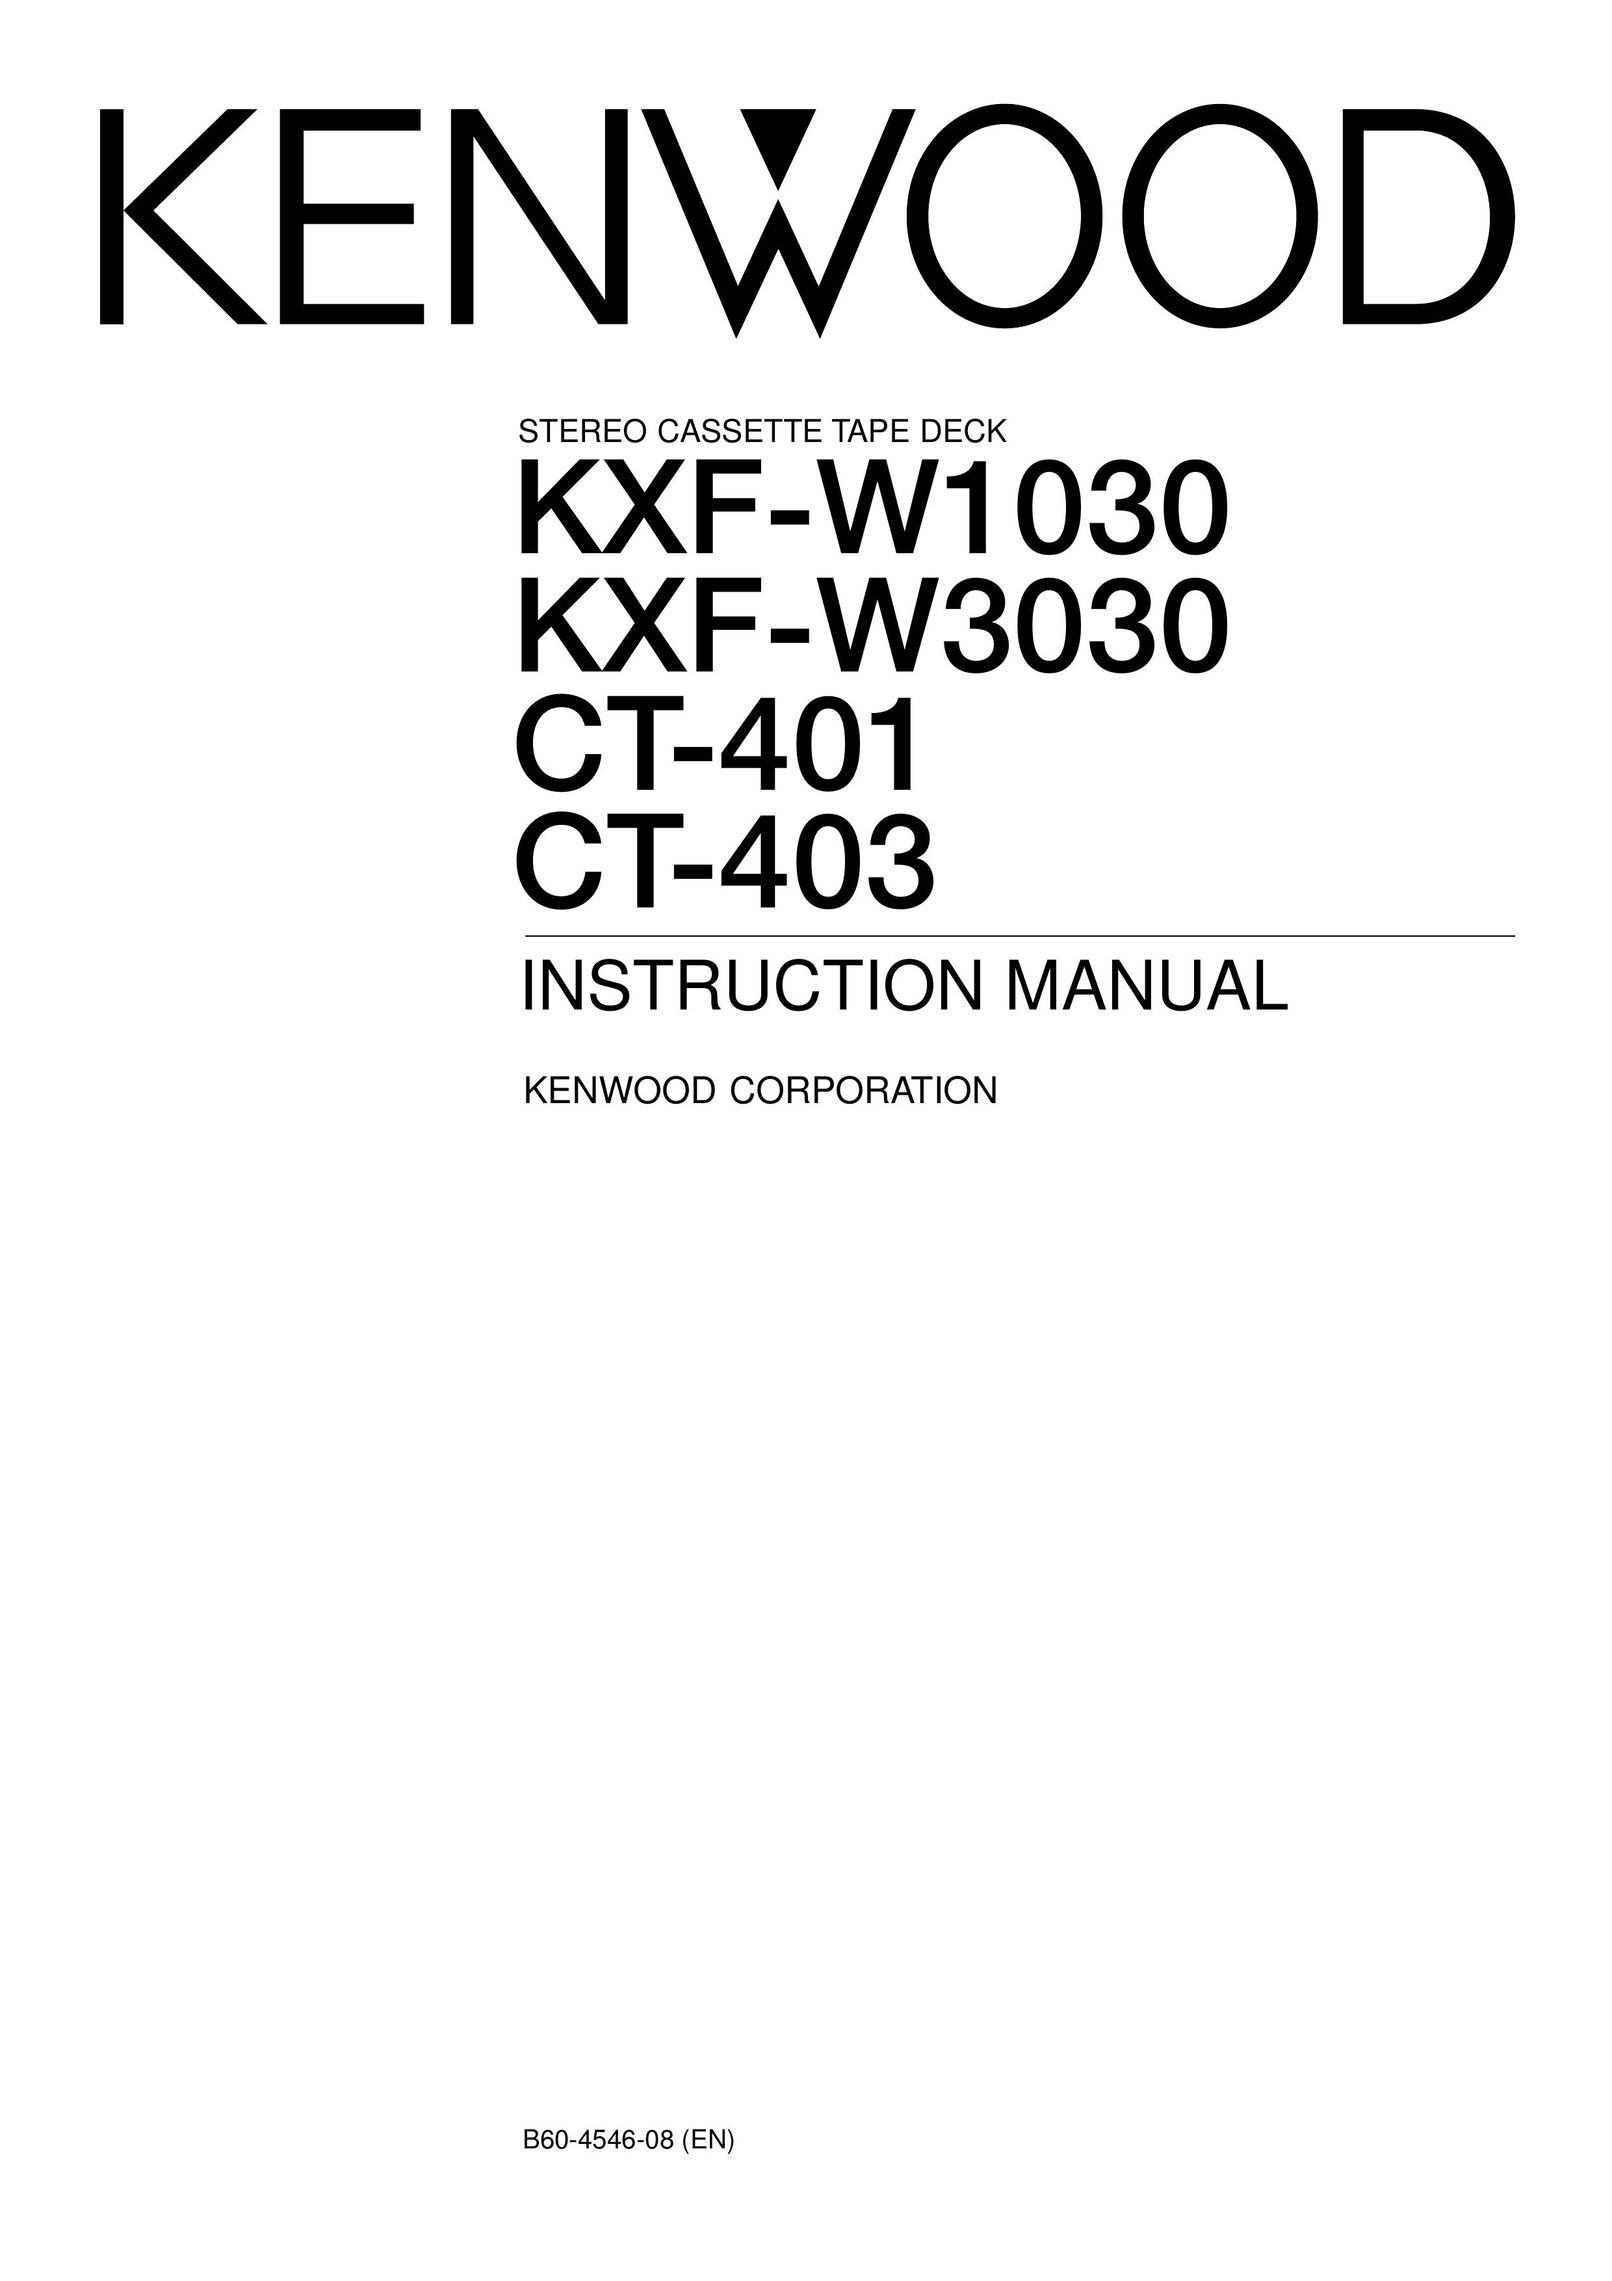 Kenwood CT-403 Stereo System User Manual